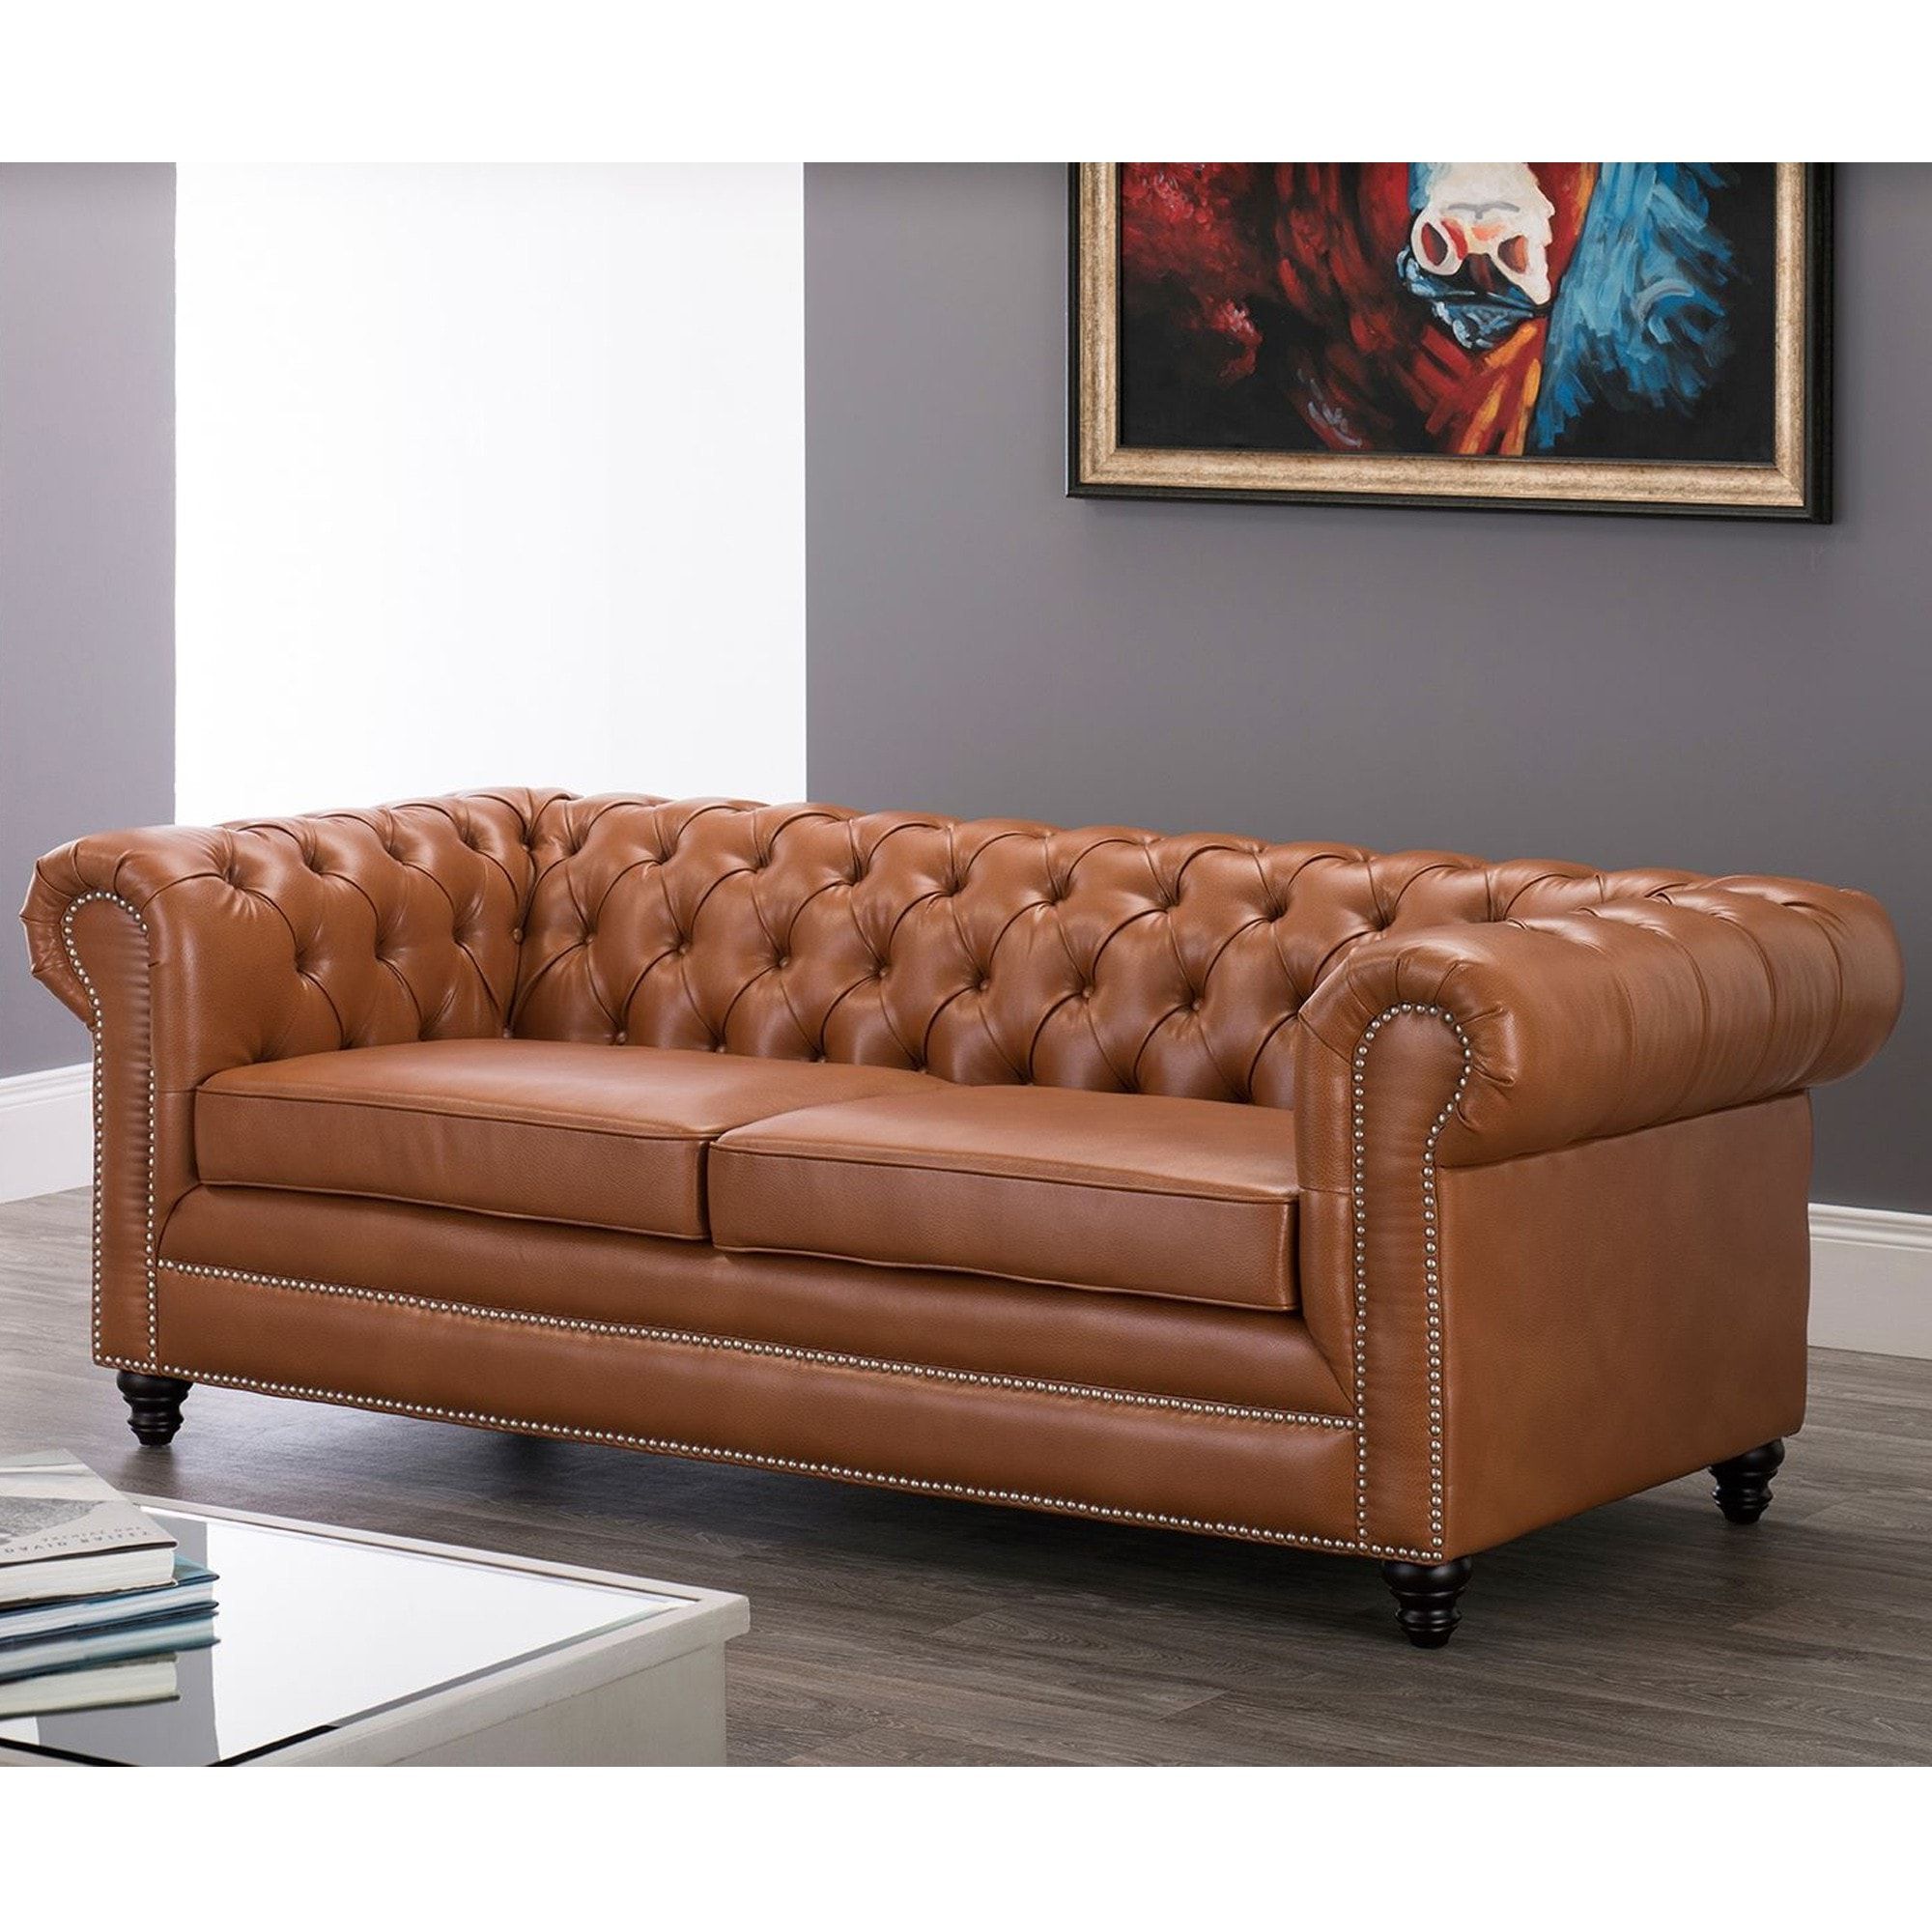 Faux Leather Chesterfield 3 Seater Sofa Tan | Tan Chesterfield Sofa With Regard To Traditional 3 Seater Faux Leather Sofas (Gallery 3 of 20)